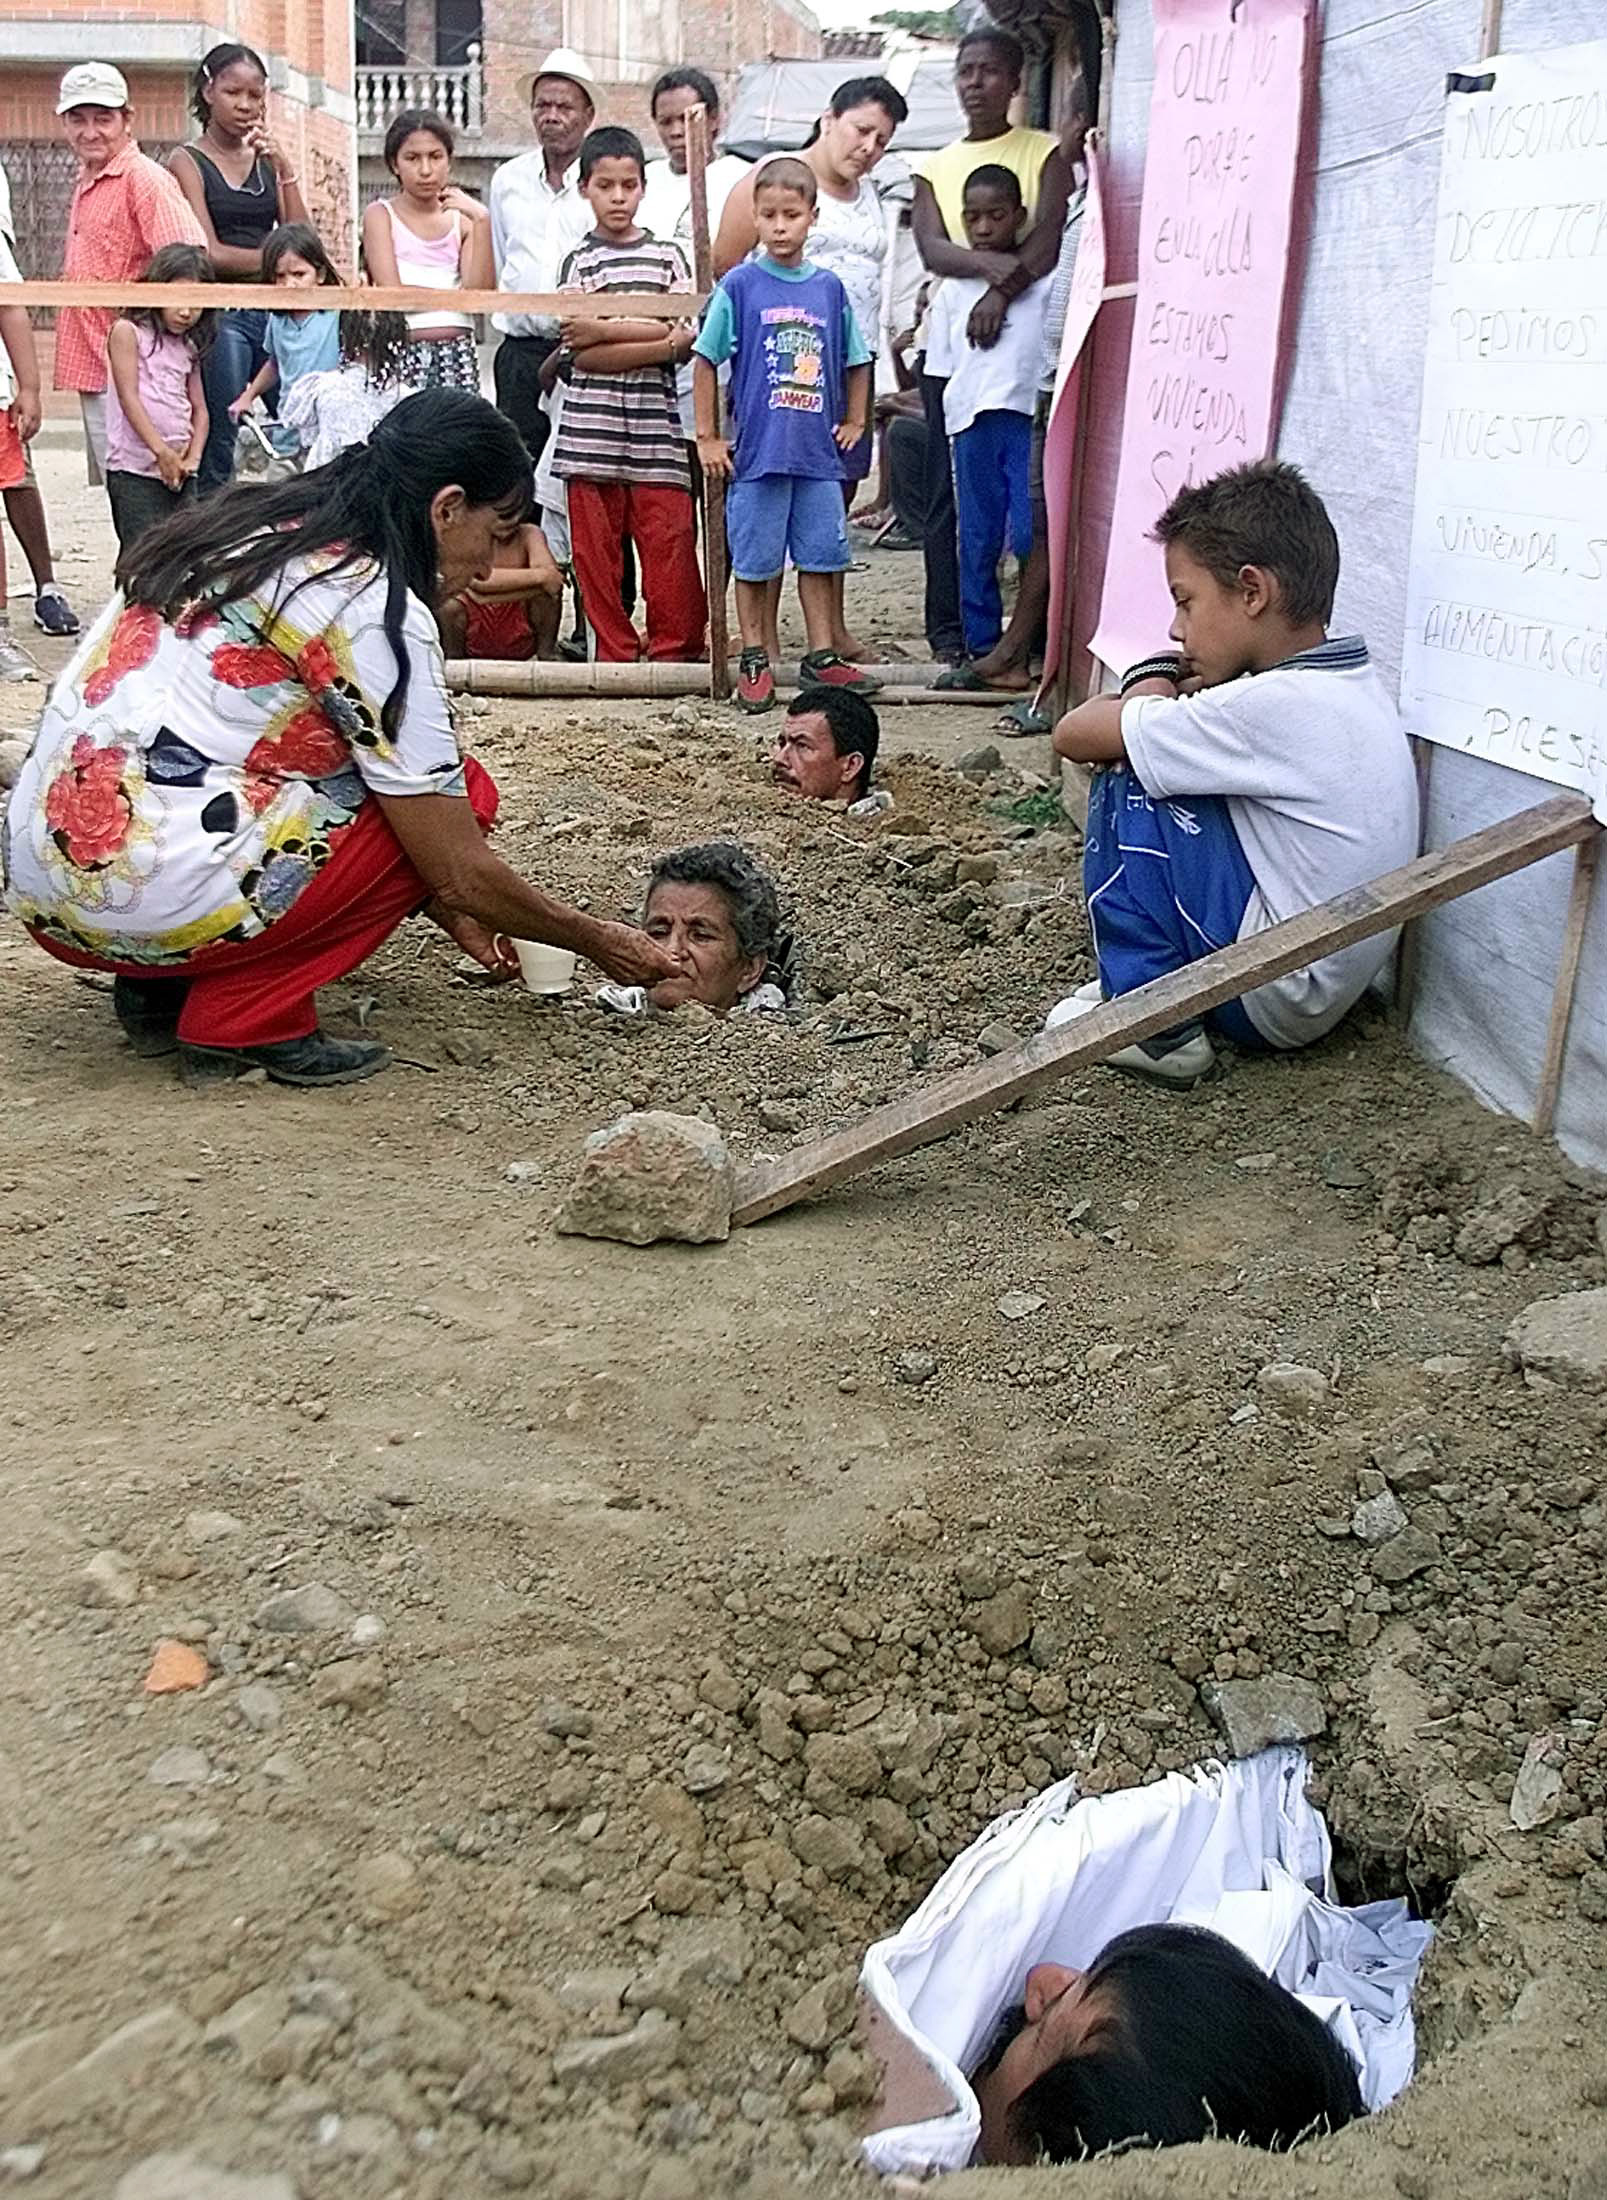 Colombian Maria Gabriela Ruiz, 66, (C) is aided by a woman while she lies buried in the ground up to her neck along with Olmedo Gomez, 42, (bottom) and Nicolas Salazar, 32, during a protest in a popular sector of Cali, July 4, 2003. Three people, two men and a woman, buried themselves three days ago in protest against the government because 150 displaced persons have not been relocated to a safe sector of Cali. REUTERS/Eduardo Munoz